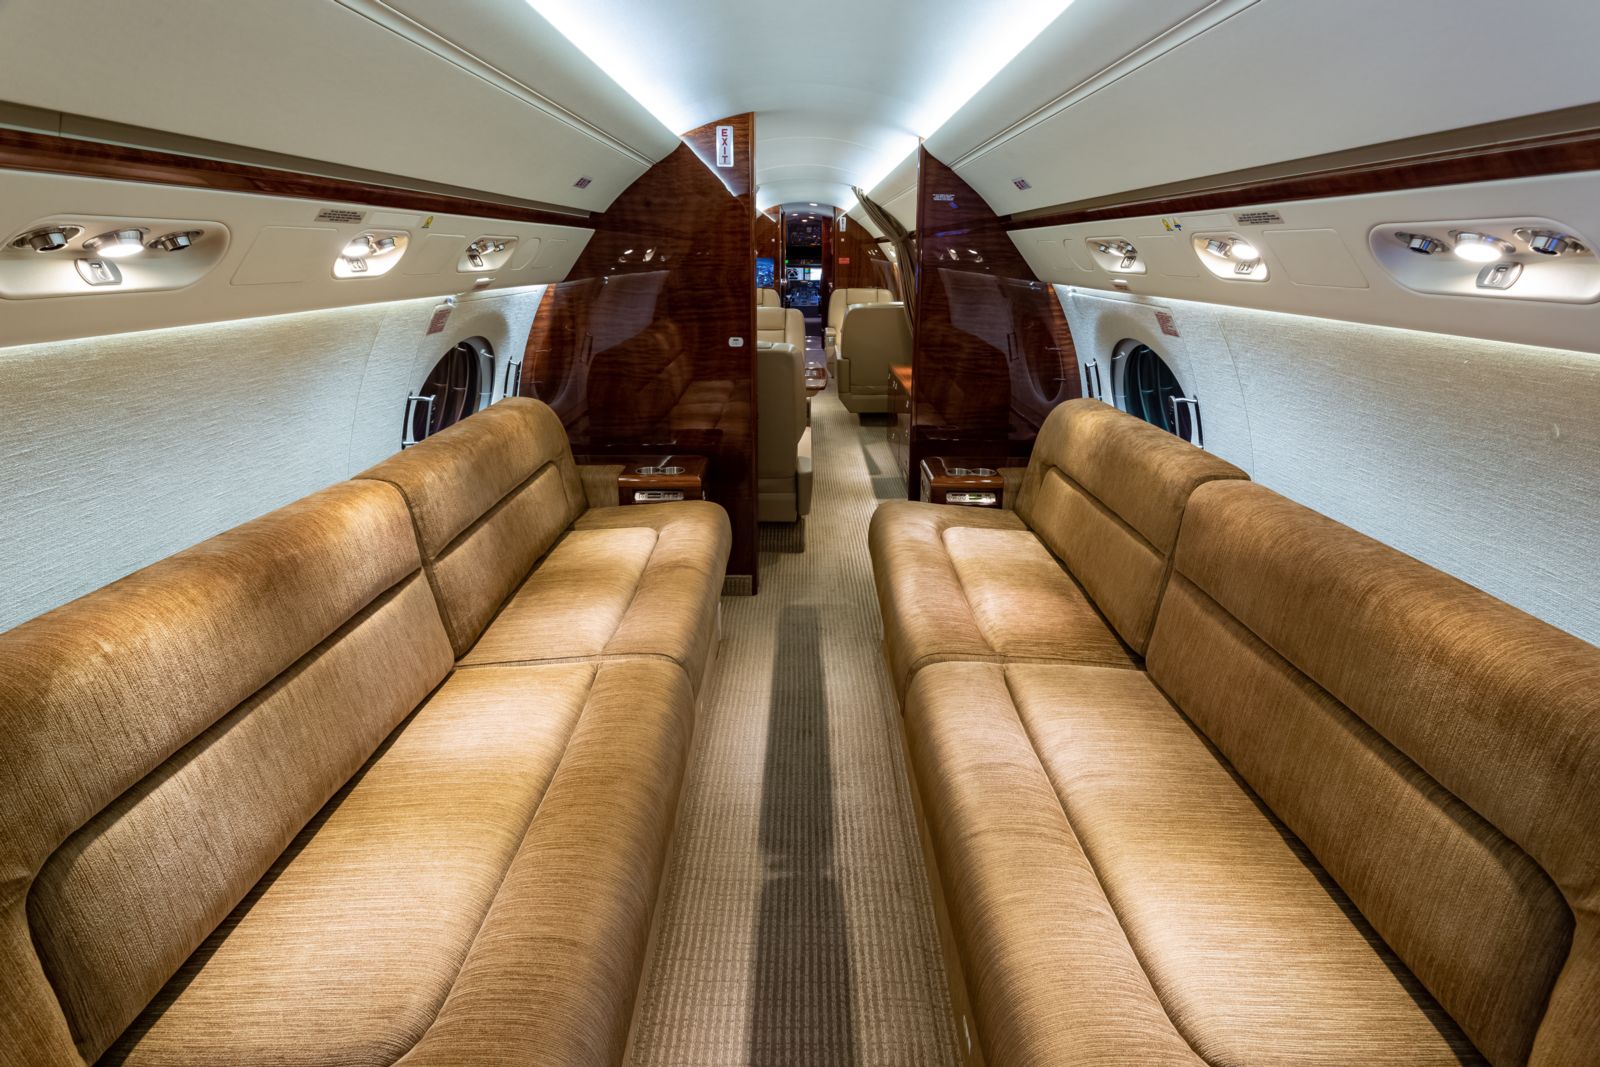 Gulfstream G550  S/N 5441 for sale | gallery image: /userfiles/images/G550_sn5441/aft%20fwd.jpg